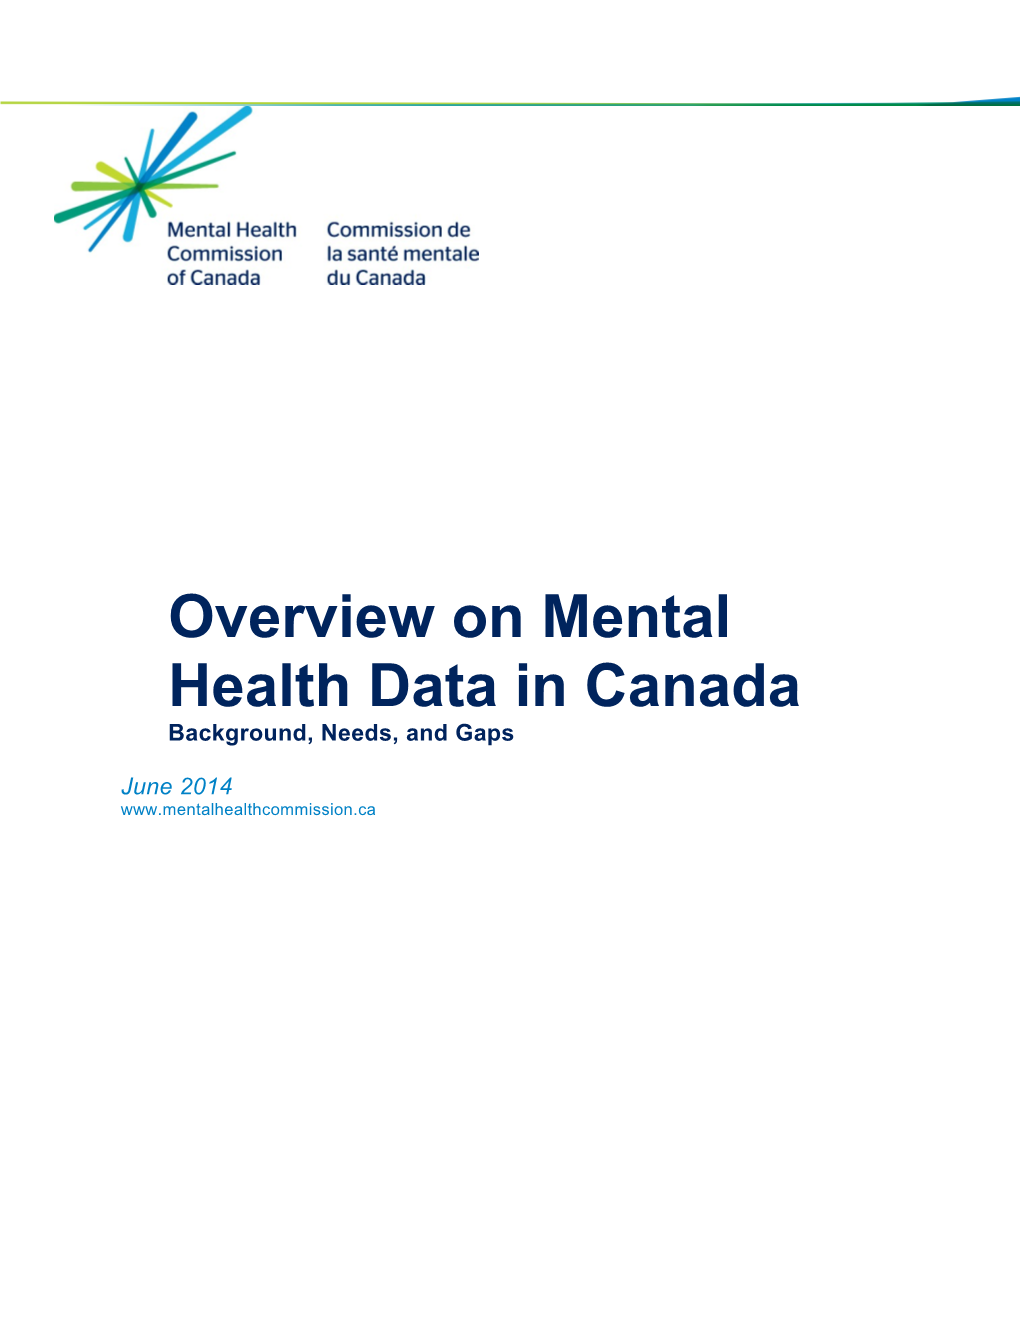 Overview on Mental Health Data in Canada